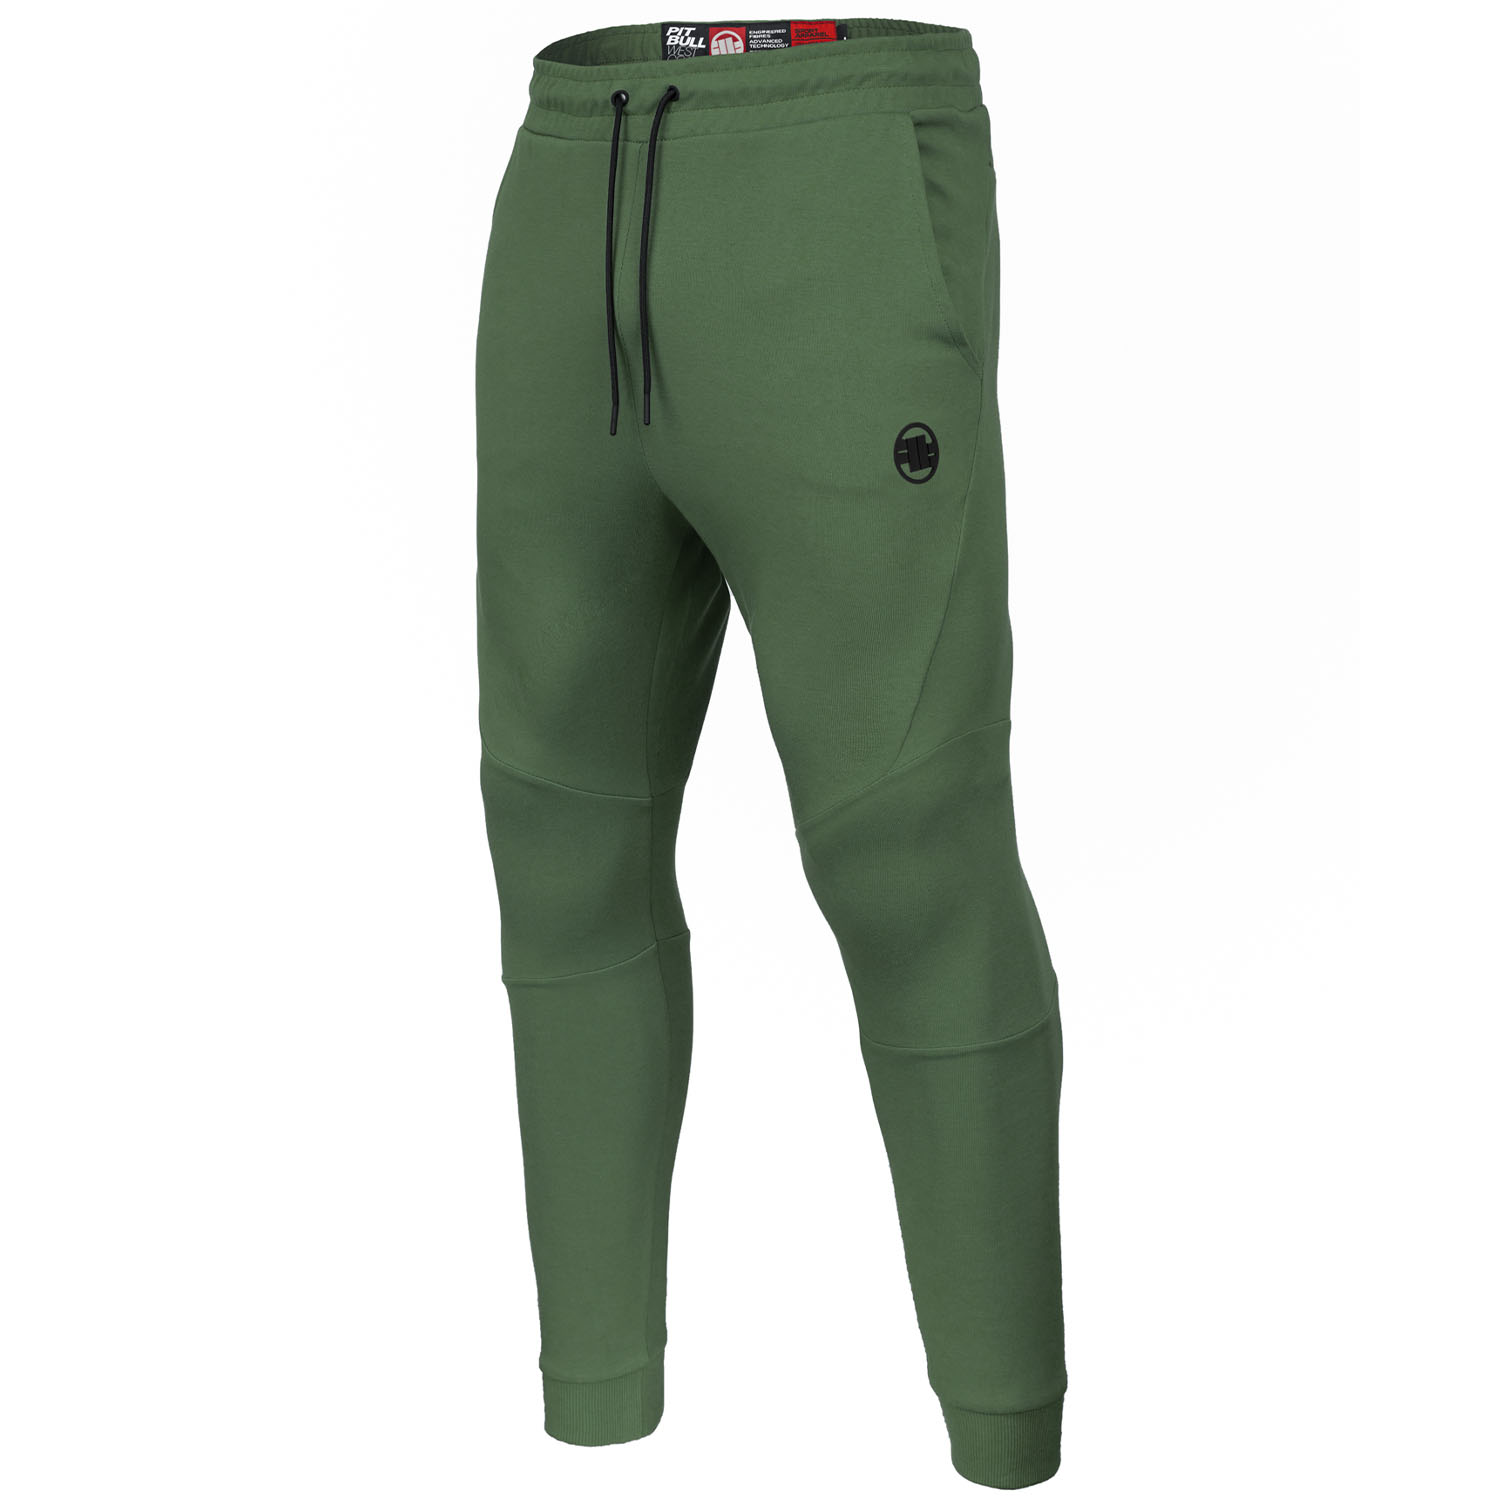 Pit Bull West Coast Jogger, Dolphin, olive, S